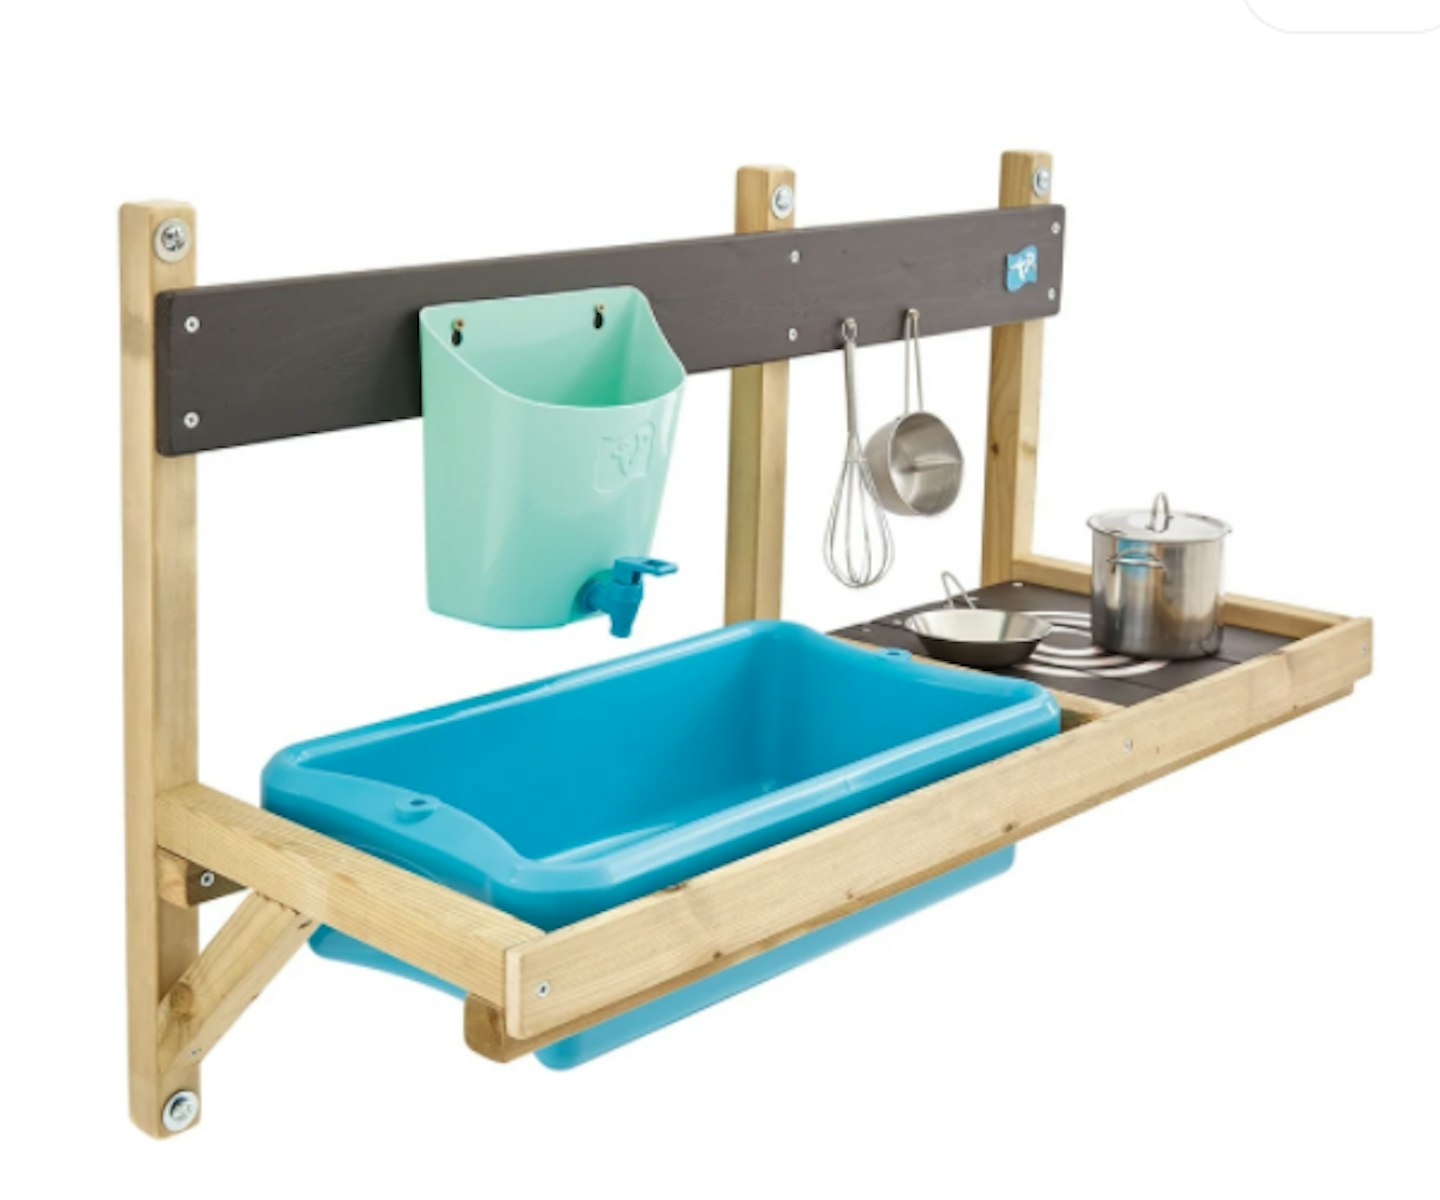 TP Deluxe Mud Kitchen Playhouse Accessory-FSC